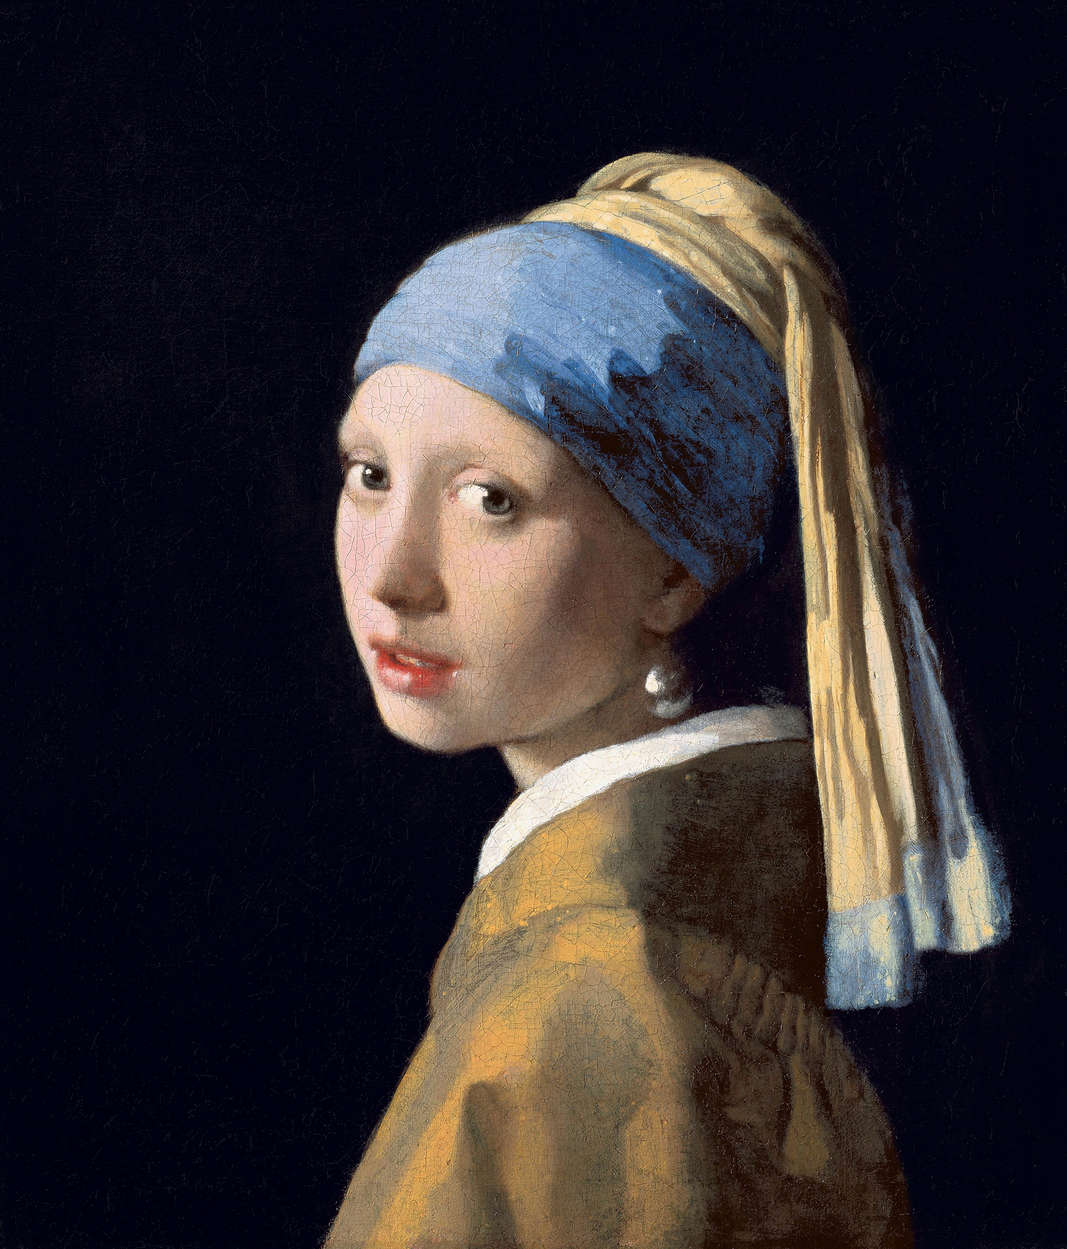             Photo wallpaper "The girl with the pearl earring" by Jan Vermeer
        